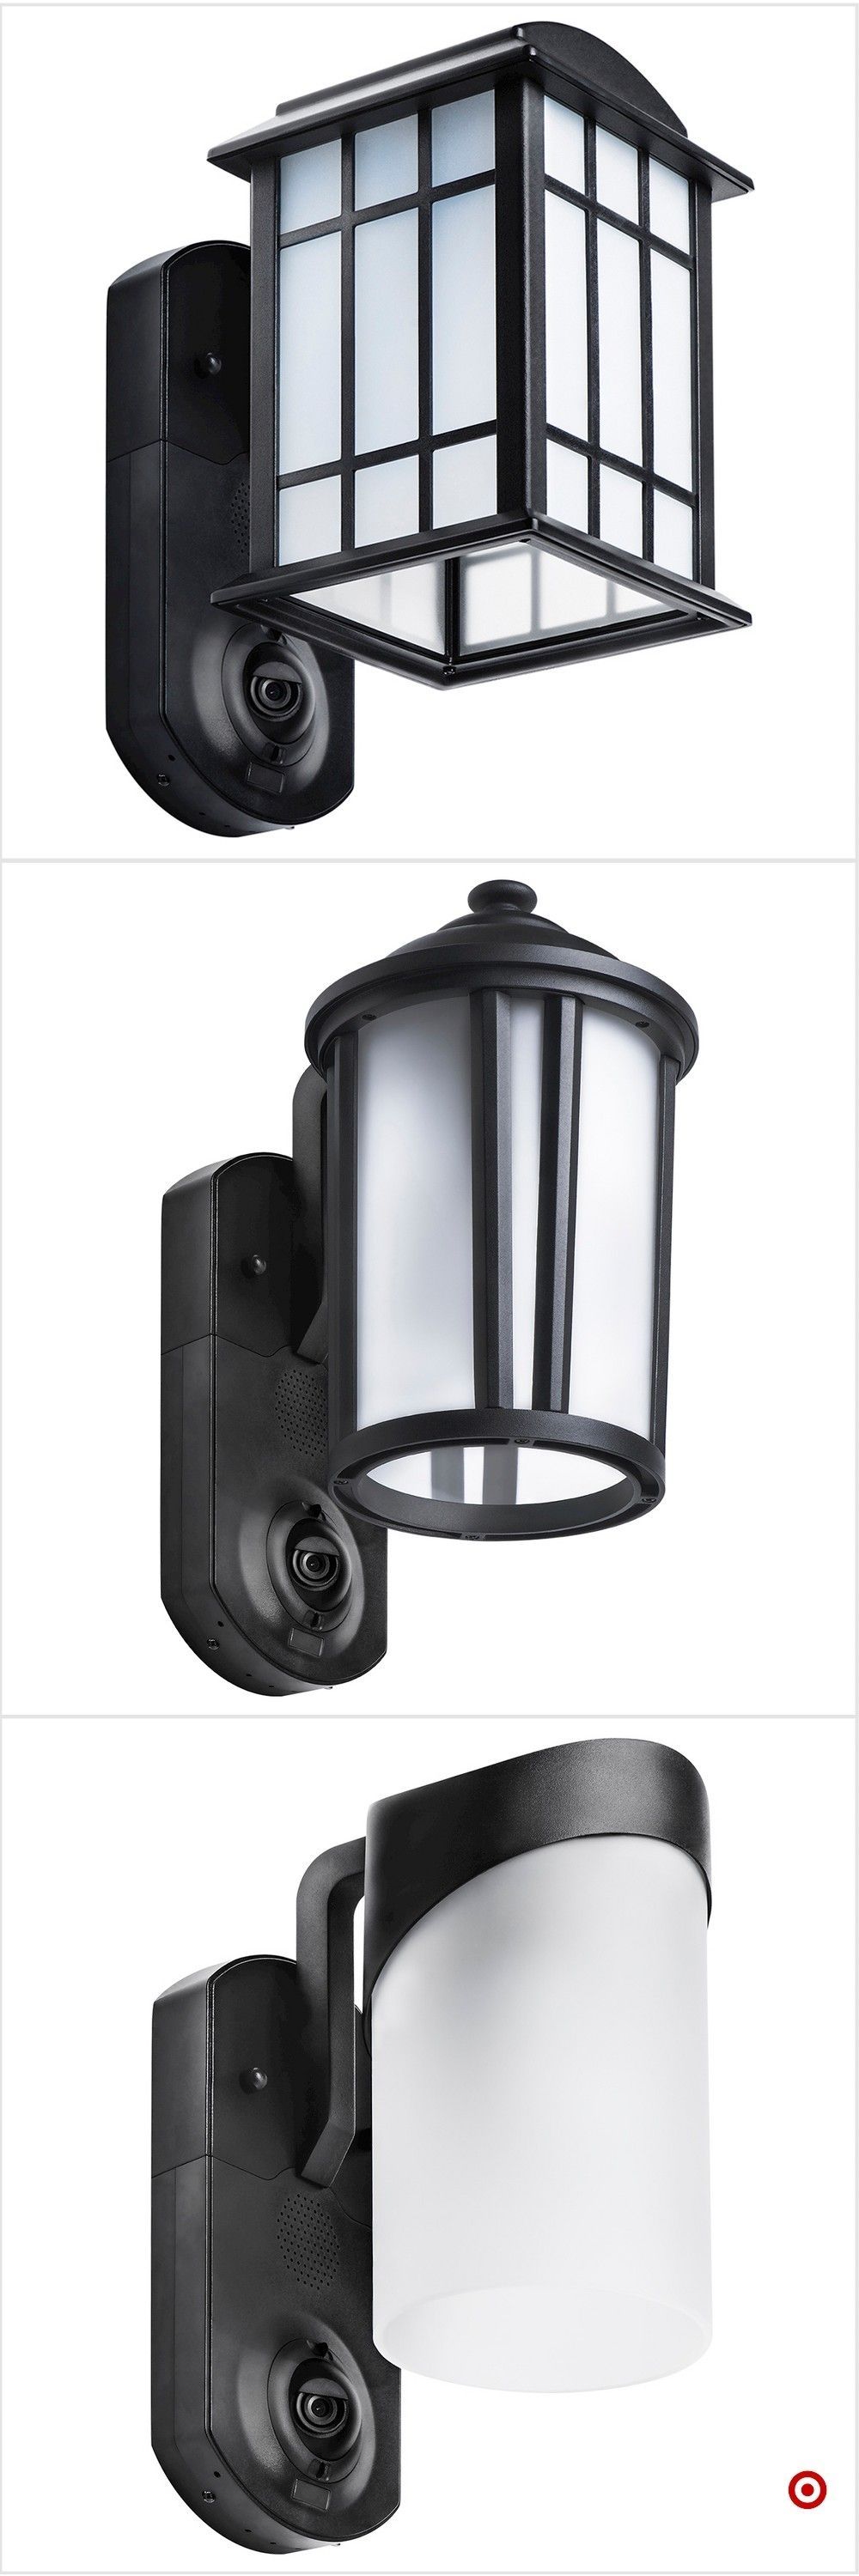 Shop Target For Outdoor Wall Lights You Will Love At Great Low With Target Outdoor Wall Lighting (View 6 of 15)